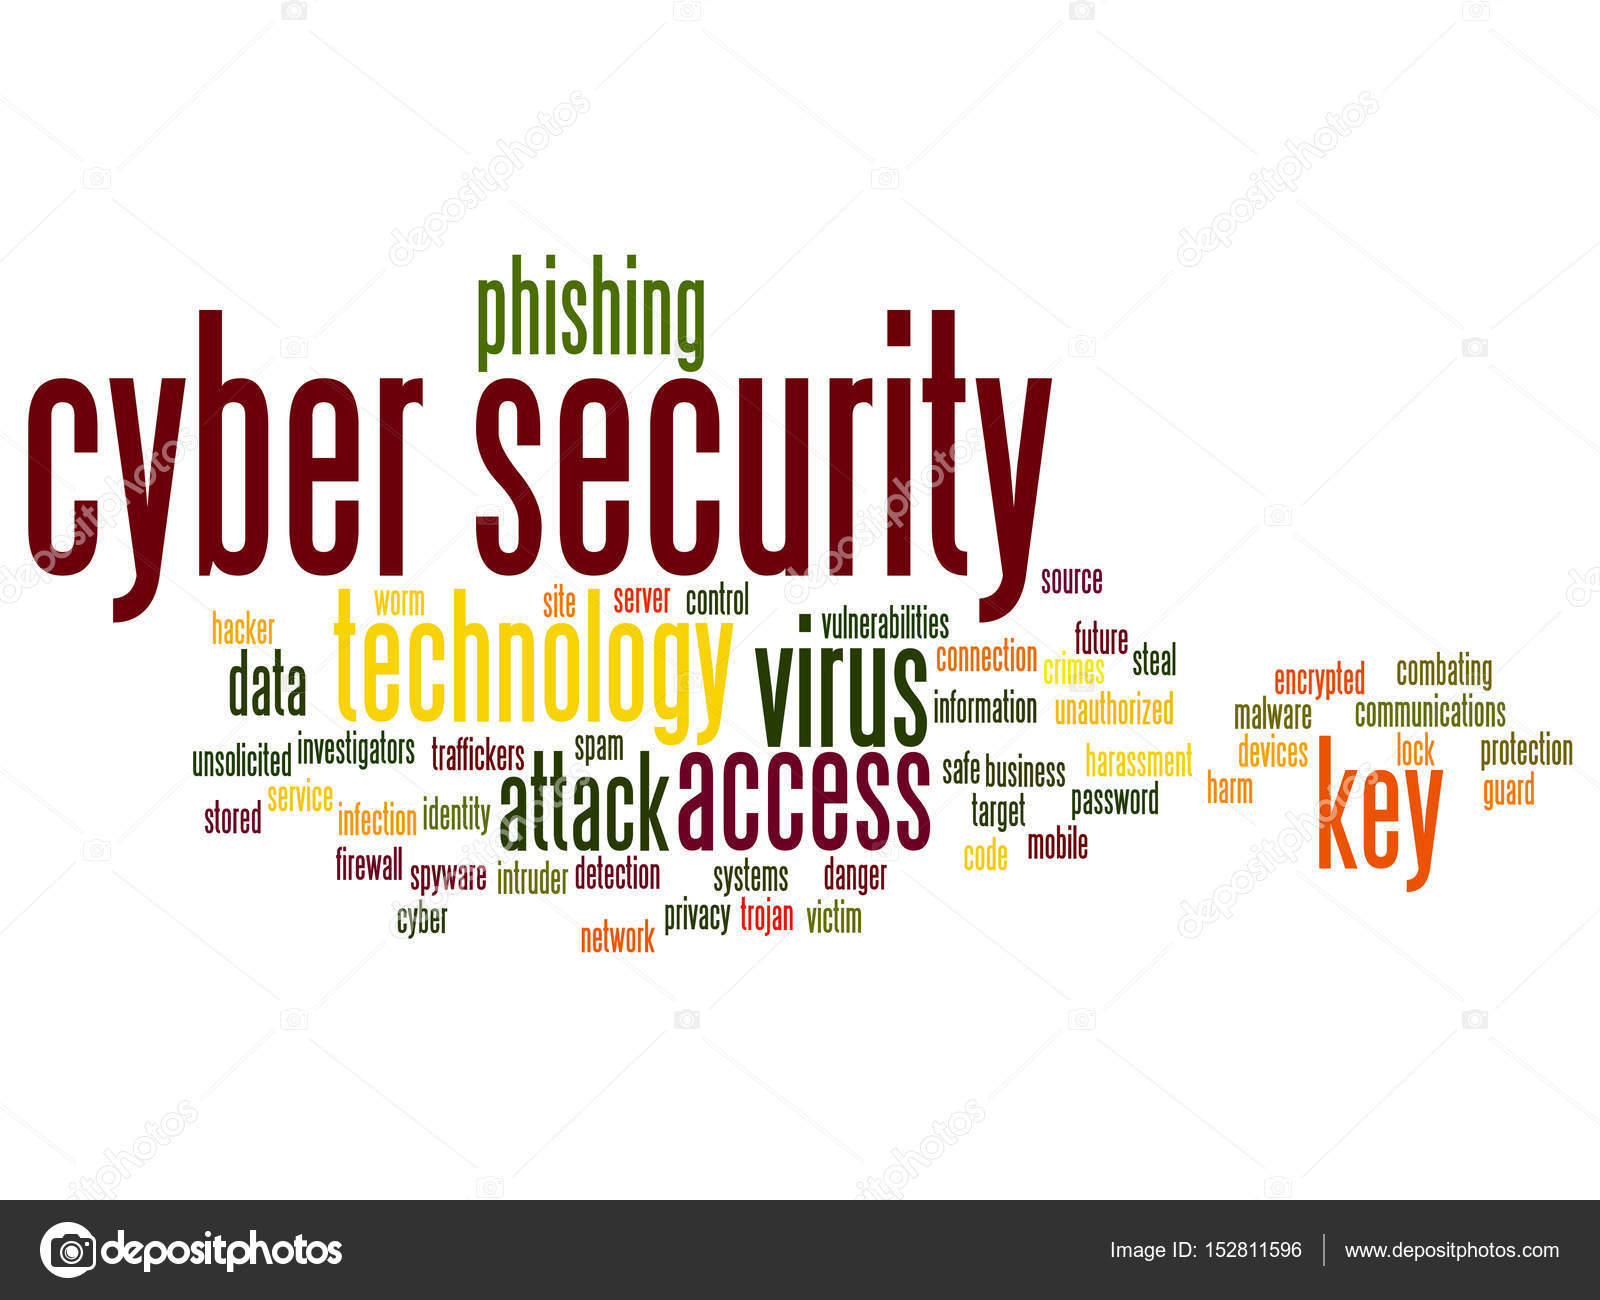 cyber security concept — Stock Photo © design36 #152811596